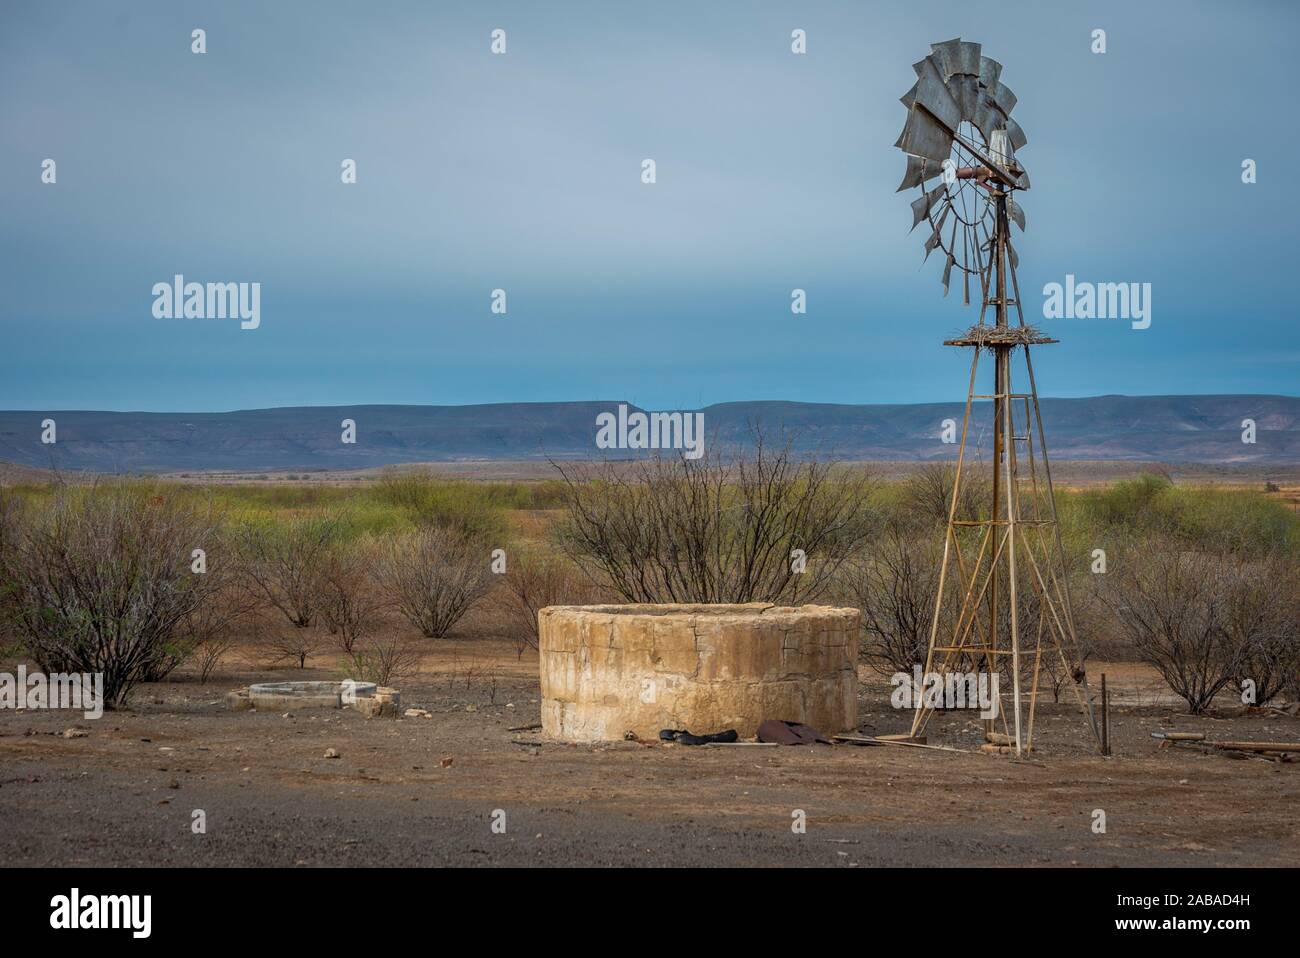 Windmill remains locked in this uncompromising, arrid landscape. The reservoir is dry. The earth is dry. All that grows are hardy Acacia thorn trees. Stock Photo